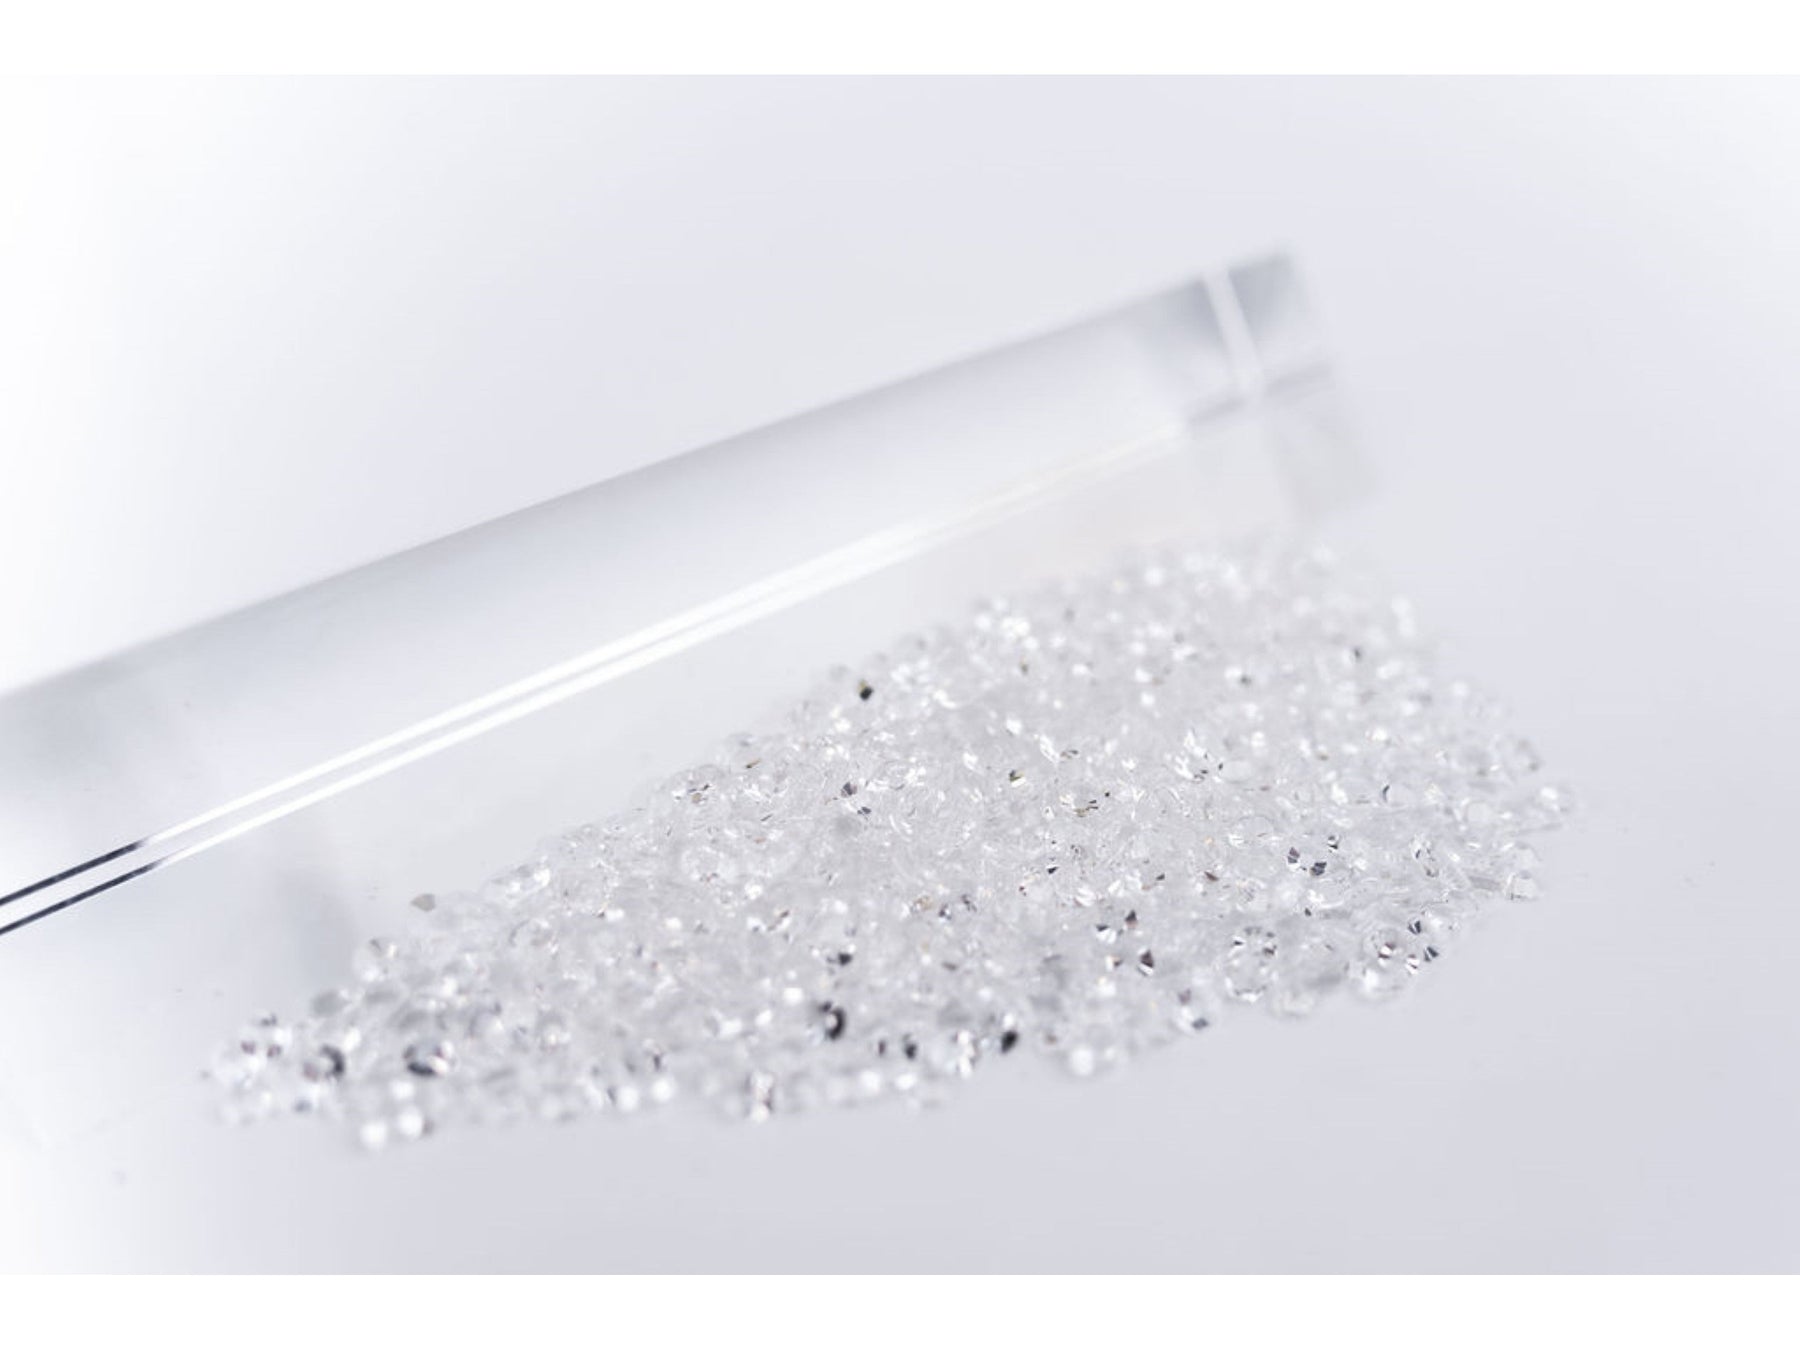 Flat back, Dance With Me™ crystal rhinestone, crystal clear, foil back,  1.9-2.1mm rose, SS6. Sold per pkg of 144 (1 gross). - Fire Mountain Gems  and Beads